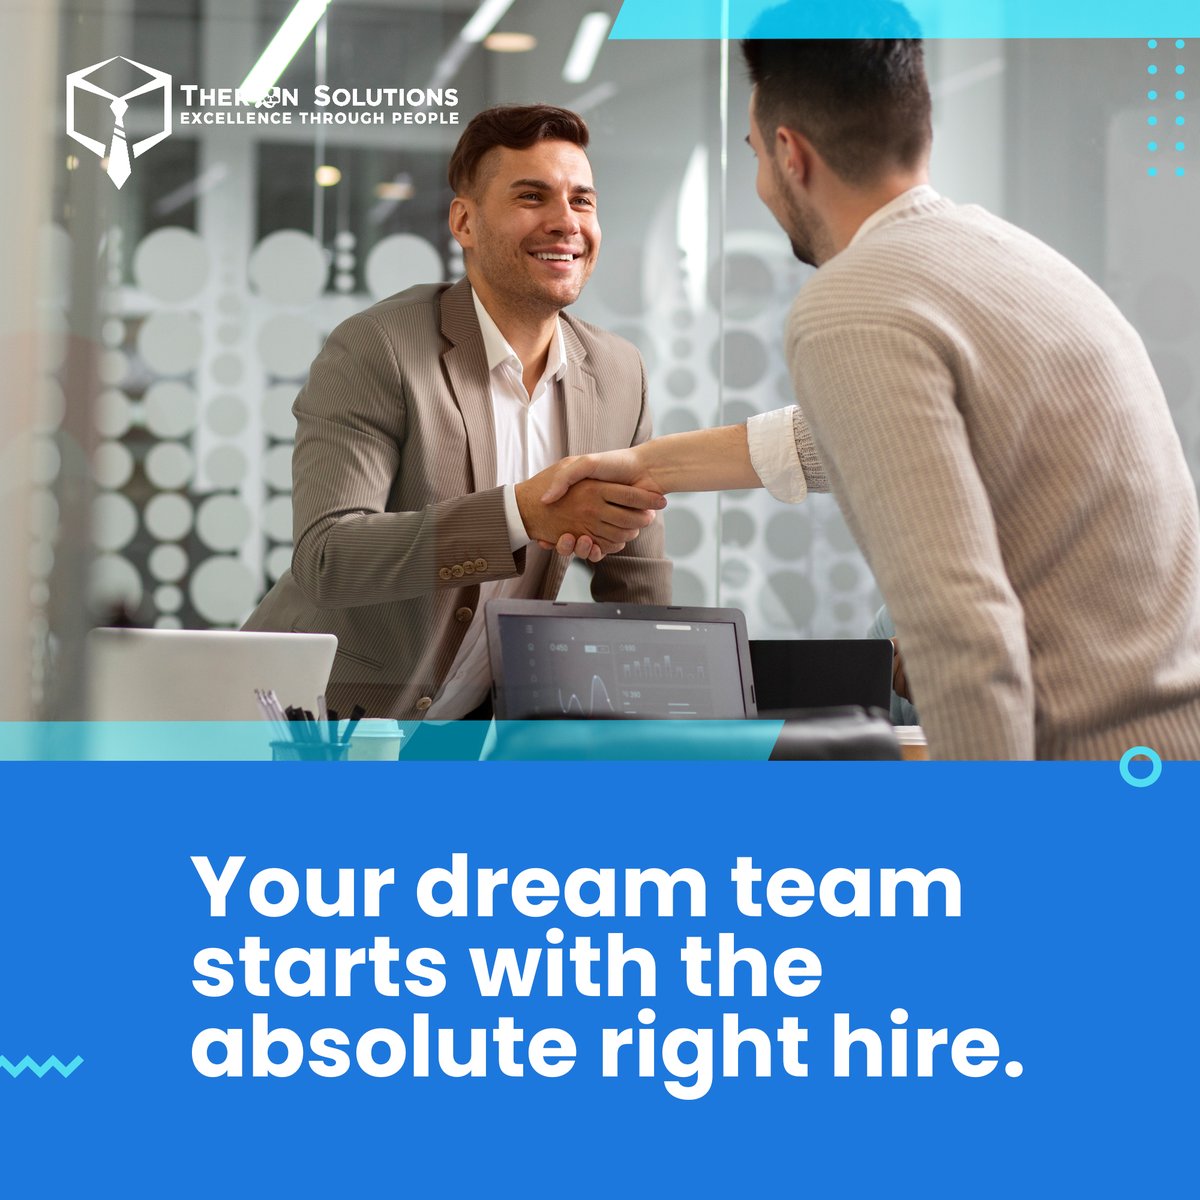 In today's competitive landscape, finding top talent is crucial. We're here to help you build your dream team!

#TalentAcquisition #RecruitmentSolutions #HiringSuccess #RecruitmentAgency #TalentManagement #JobMarket #CareerTips #WorkLifeBalance #TheronSolutions